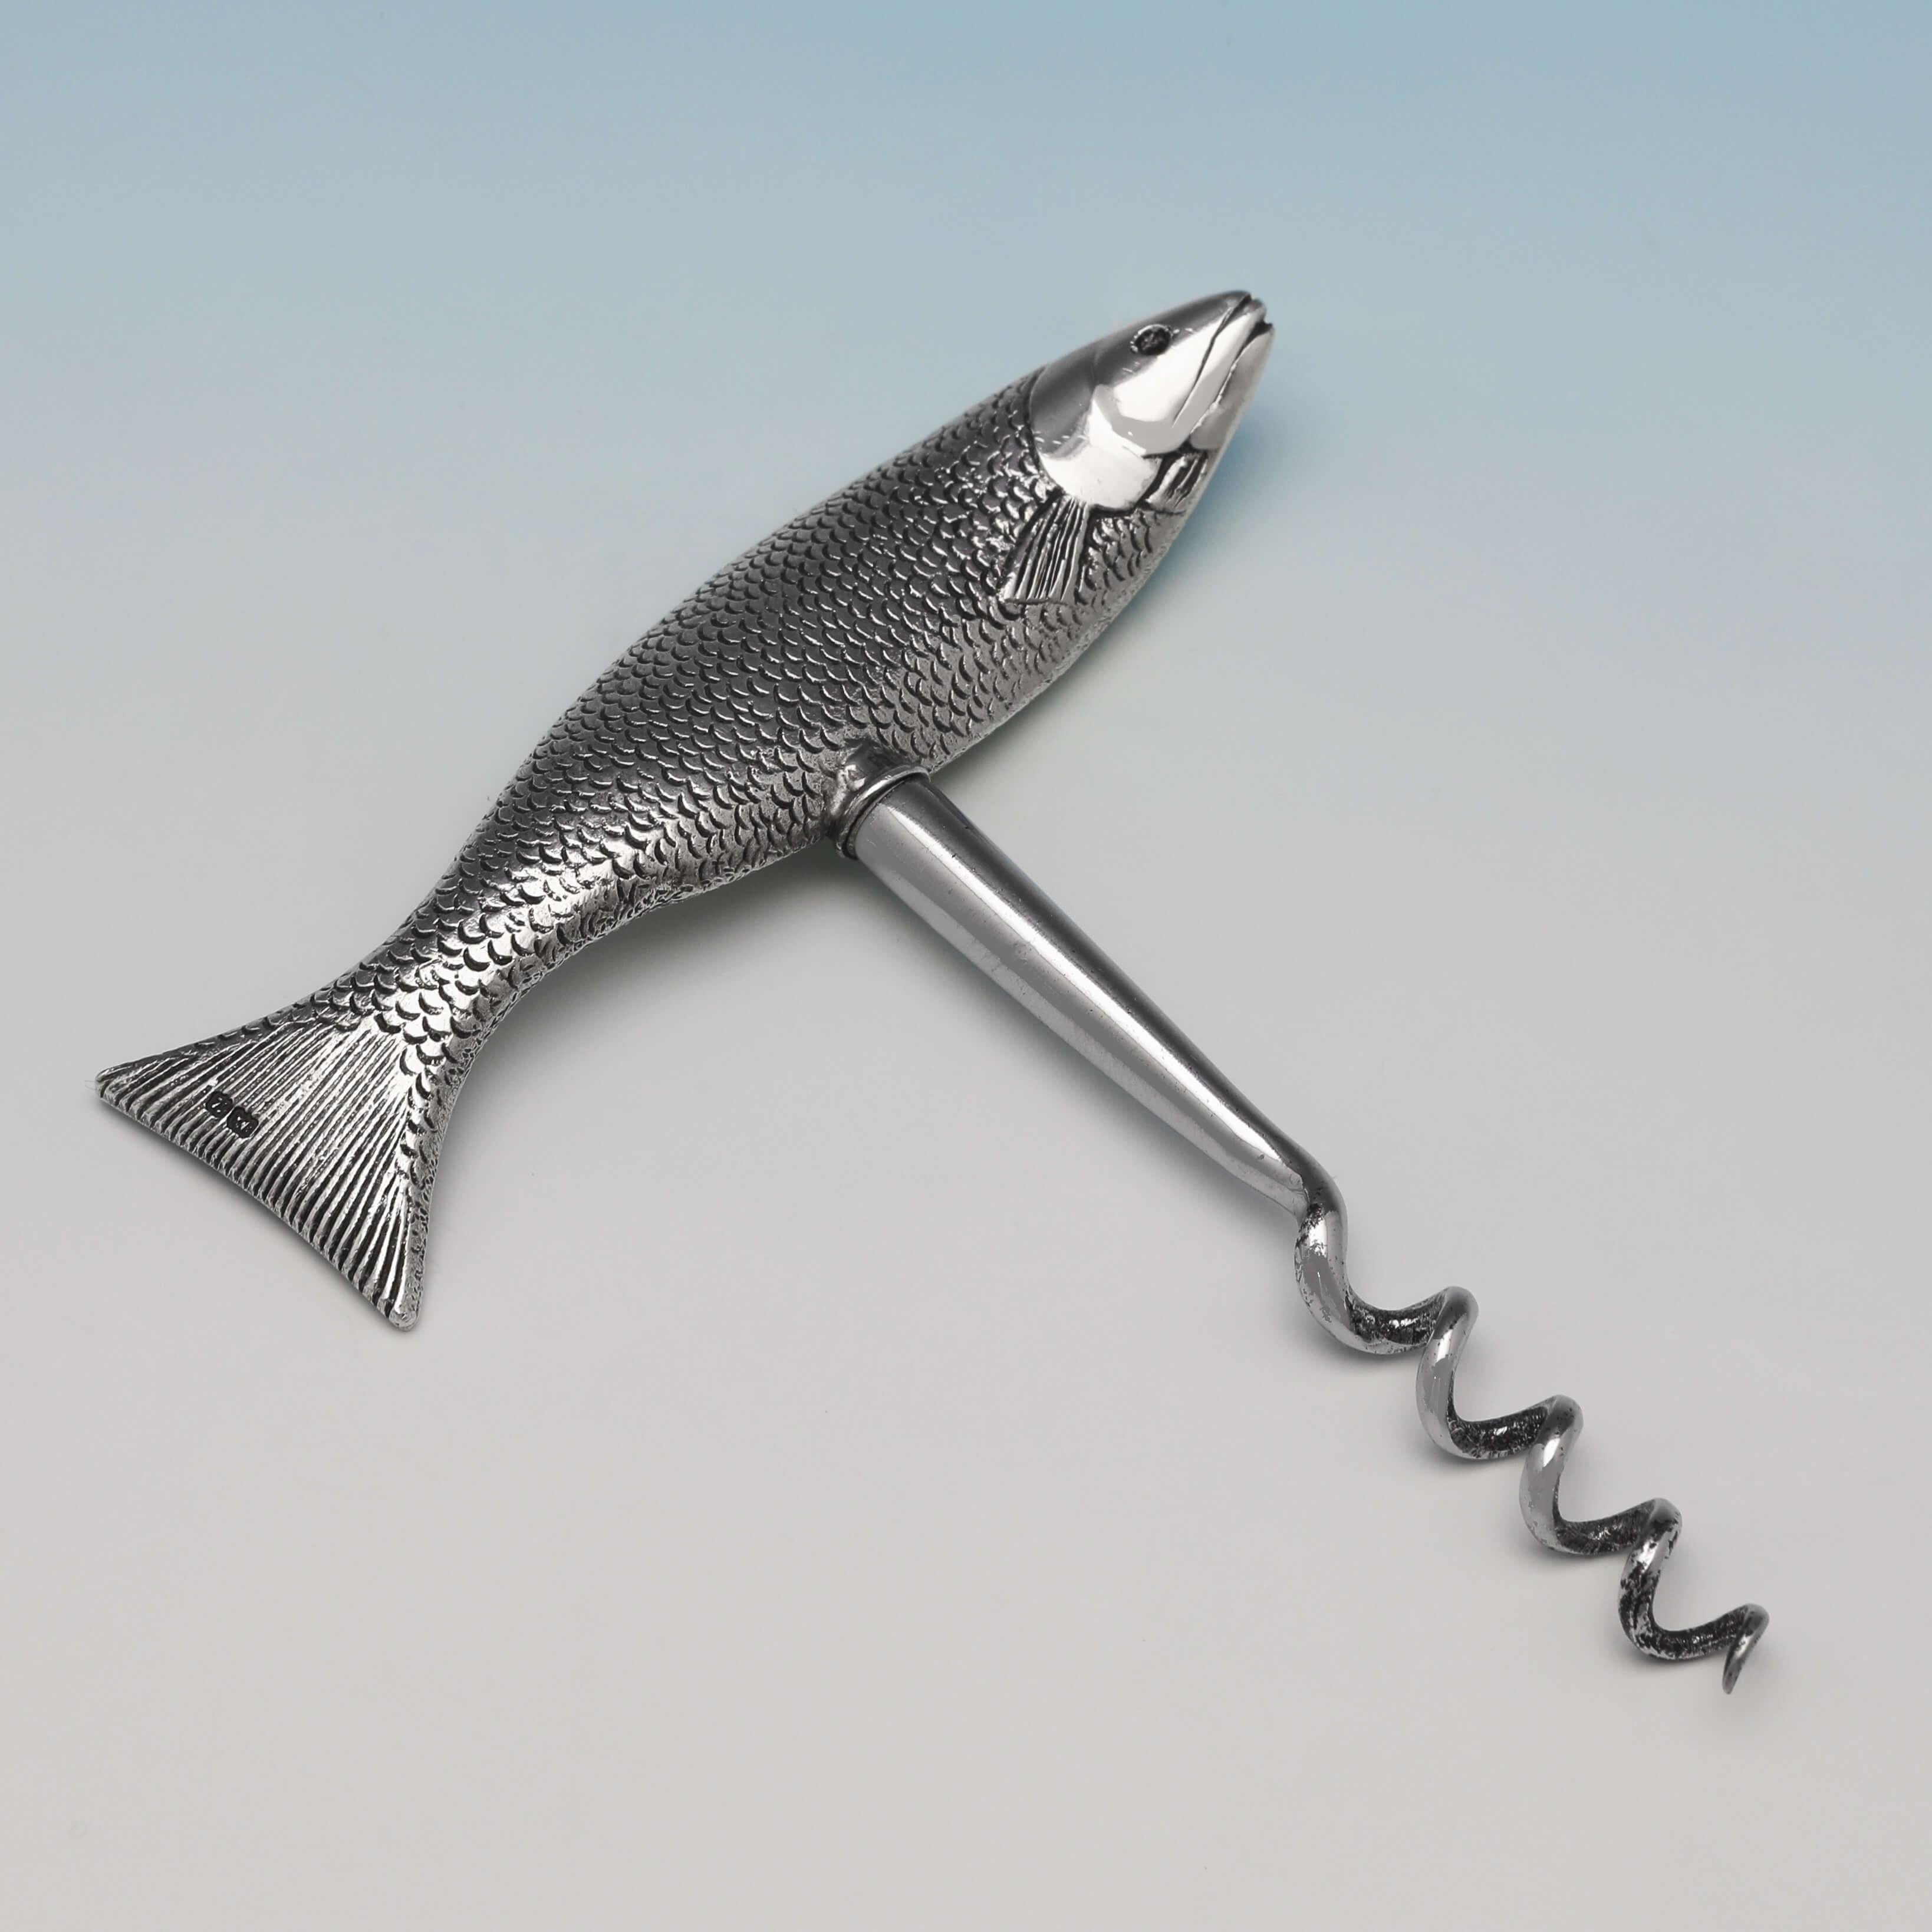 Hallmarked in Birmingham in 1949 by Walker & Hall, this delightful, novelty, sterling silver corkscrew, has the handle modelled as a fish. The corkscrew measures 4